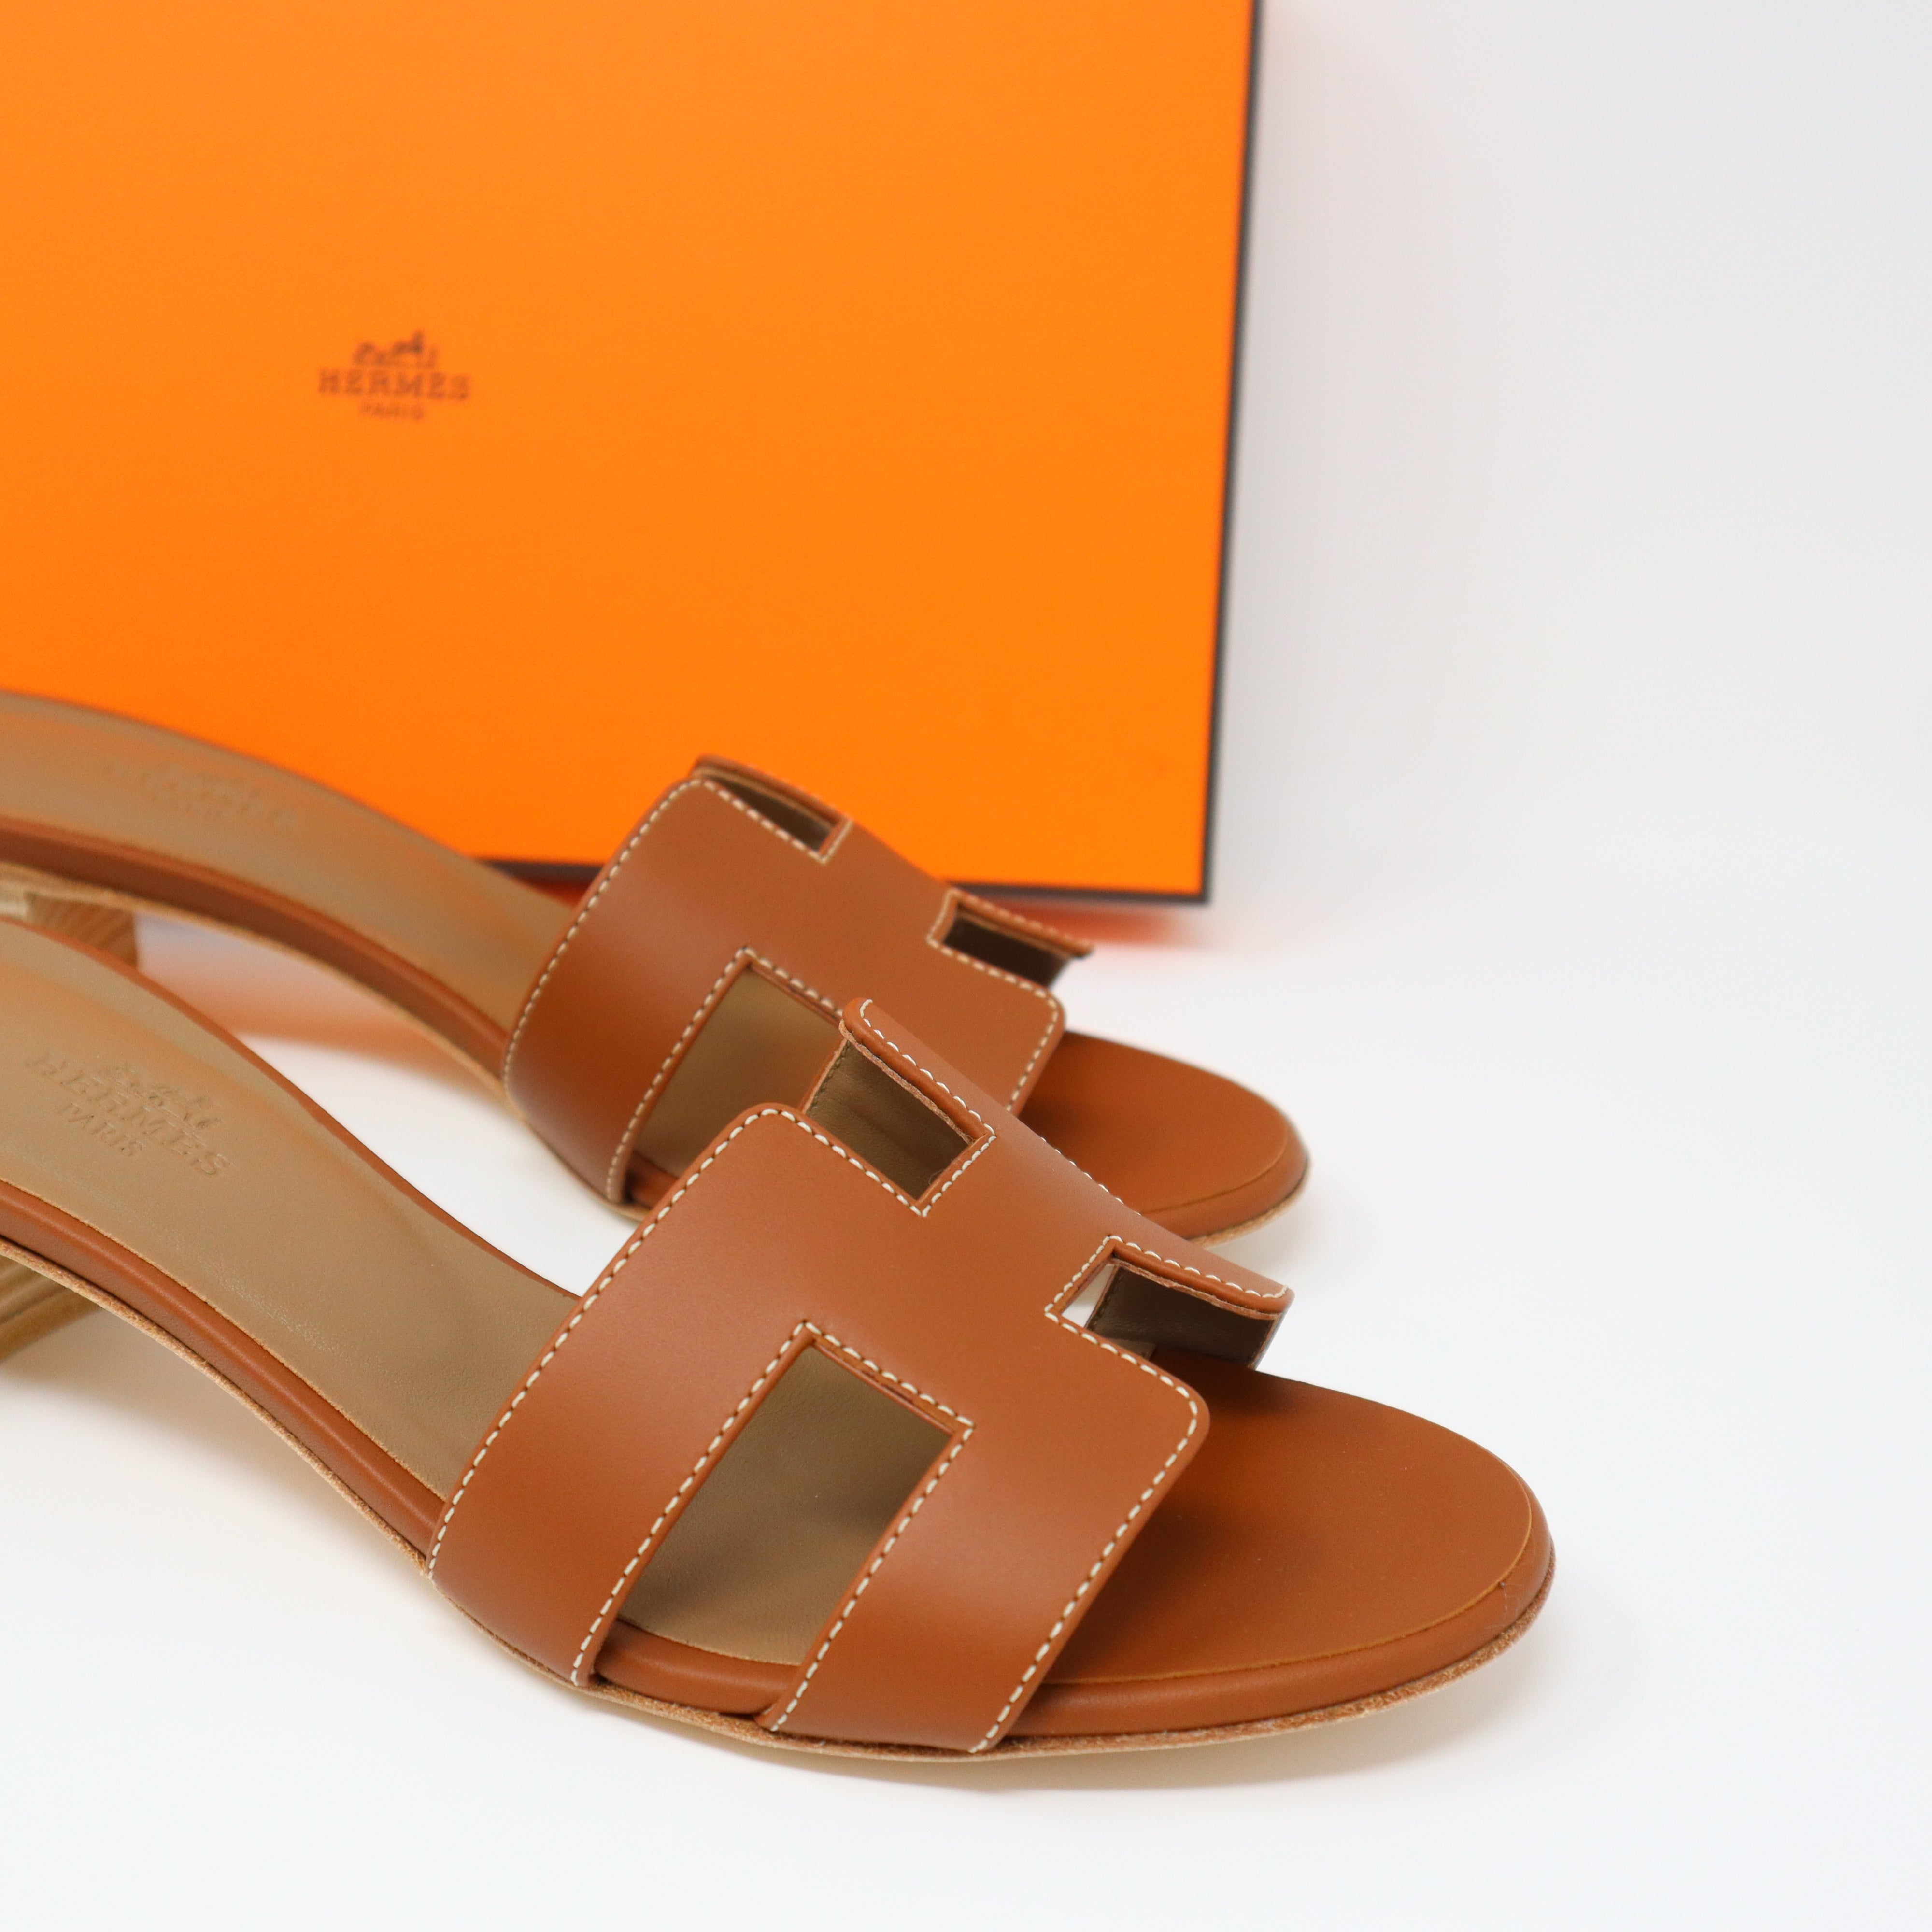 Hermes Slippers Women Leather Sandal - Leather Sandals | Pagonis Greek  Sandals